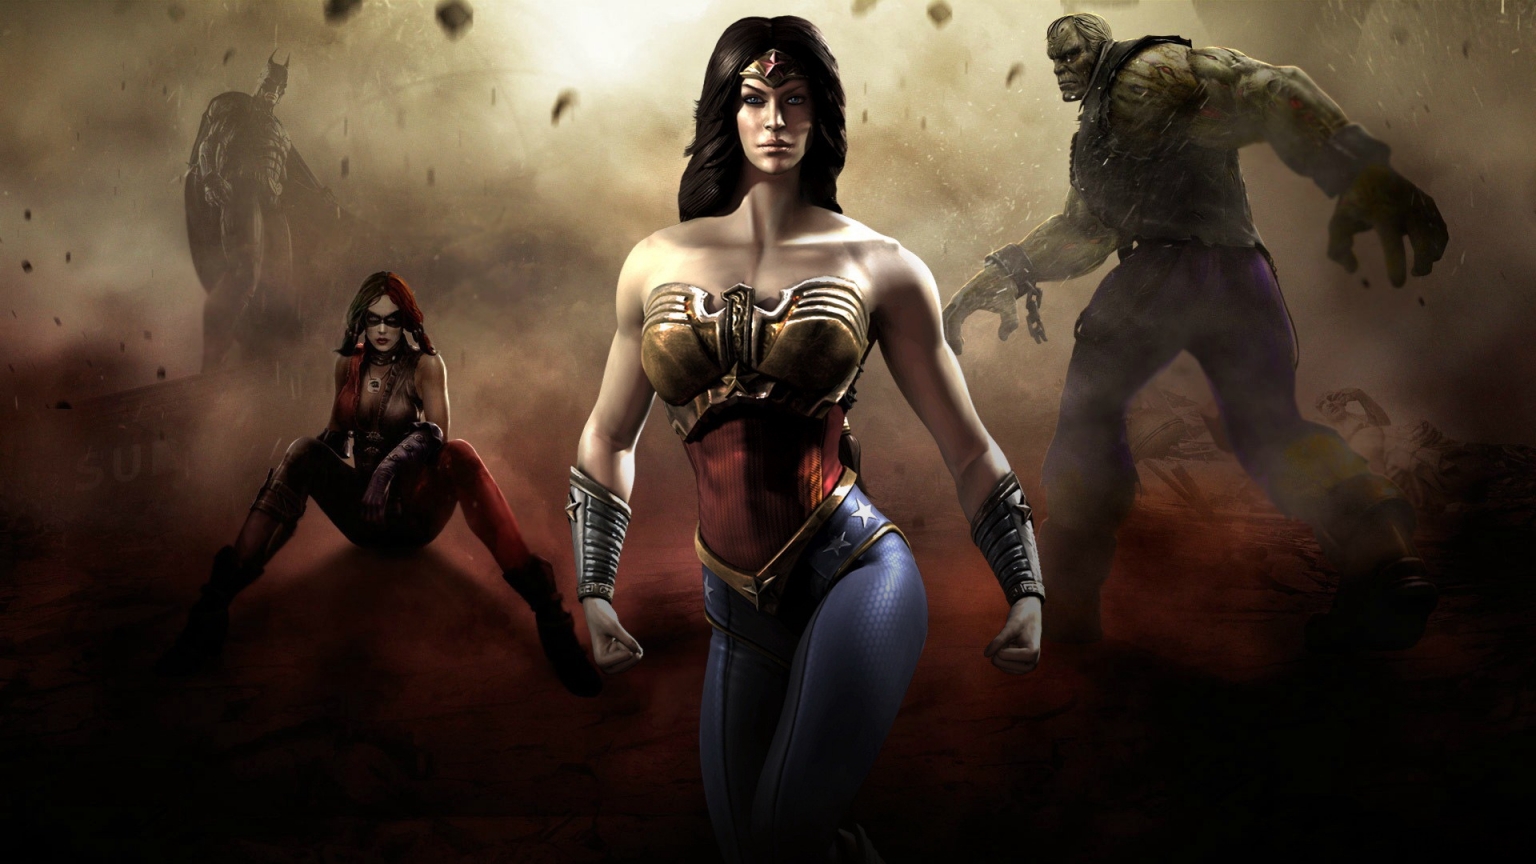 Injustice Heroes for 1536 x 864 HDTV resolution